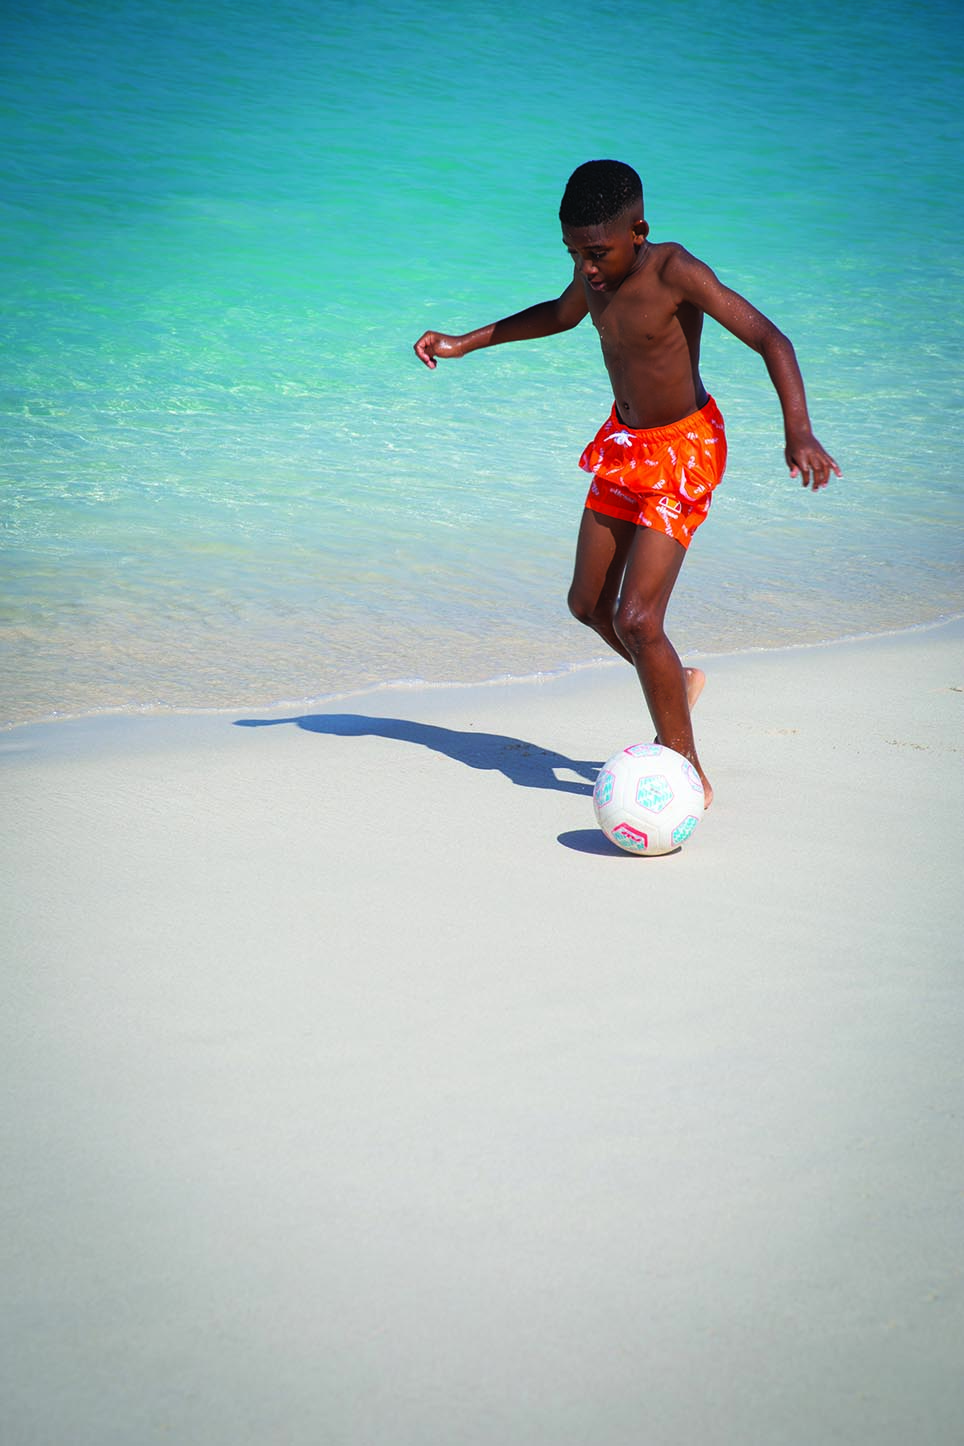 A boy playing soccer on the beach